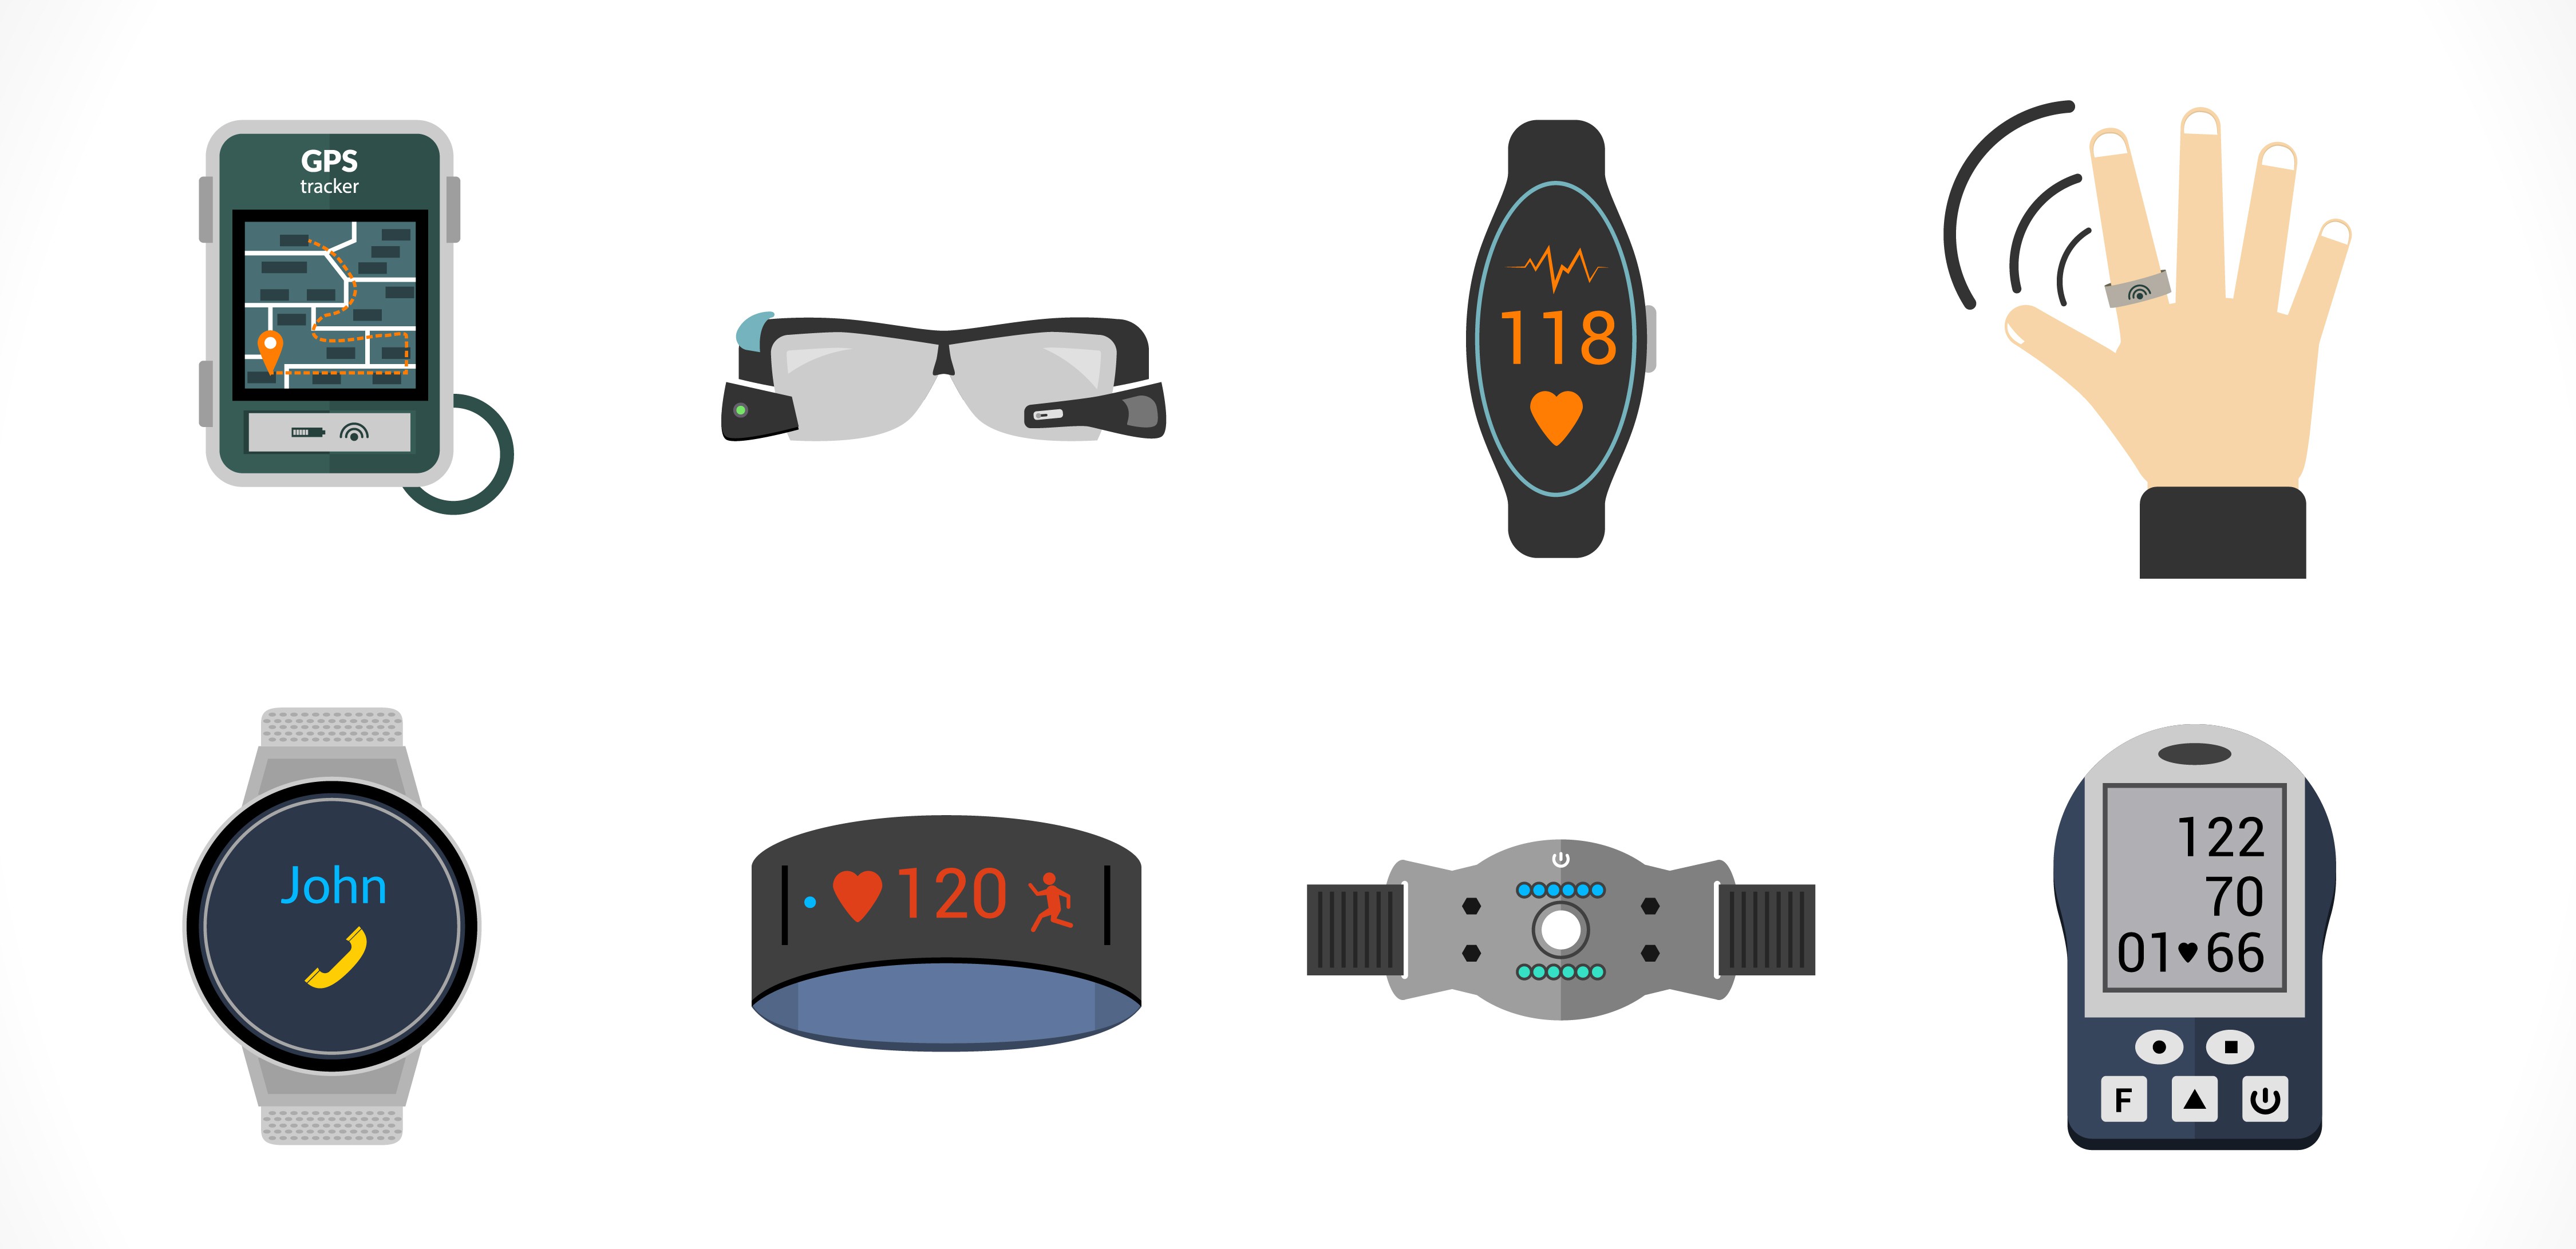 A Periodic Table Of Wearable Technology | TechCrunch